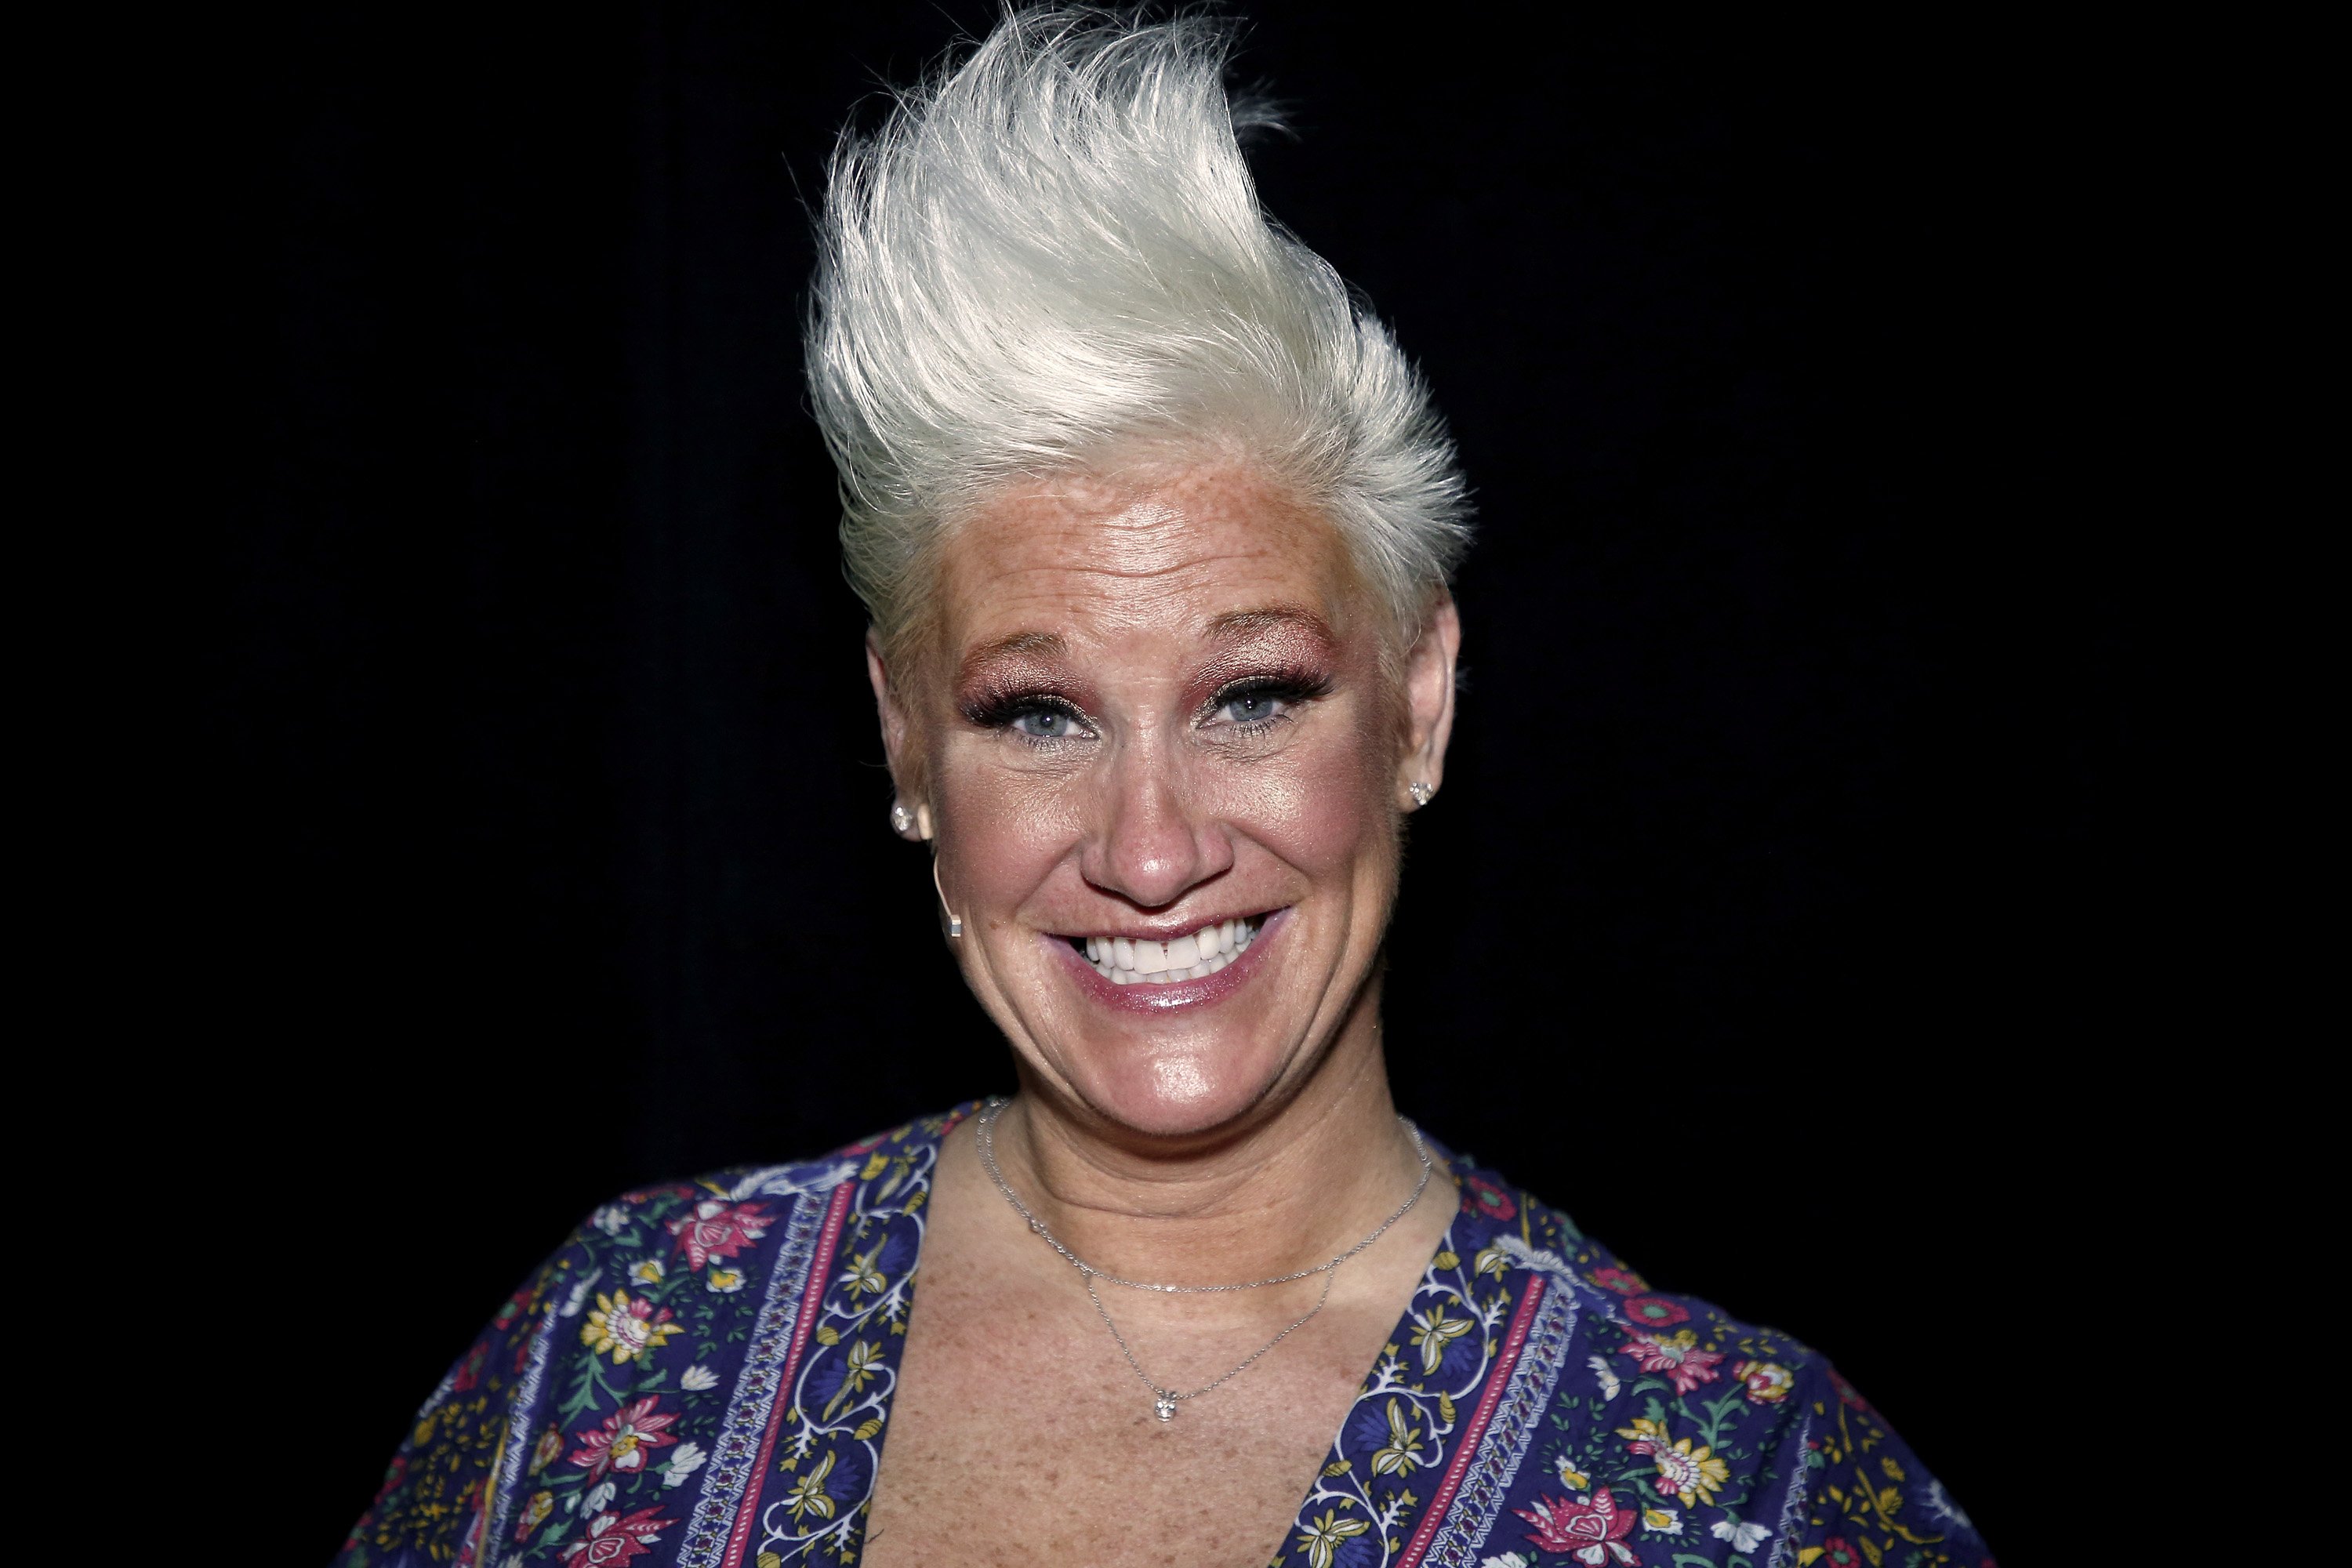  Chef Anne Burrell during the Grand Tasting presented by ShopRite f on October 13, 2019 in New York | Source: Getty Images